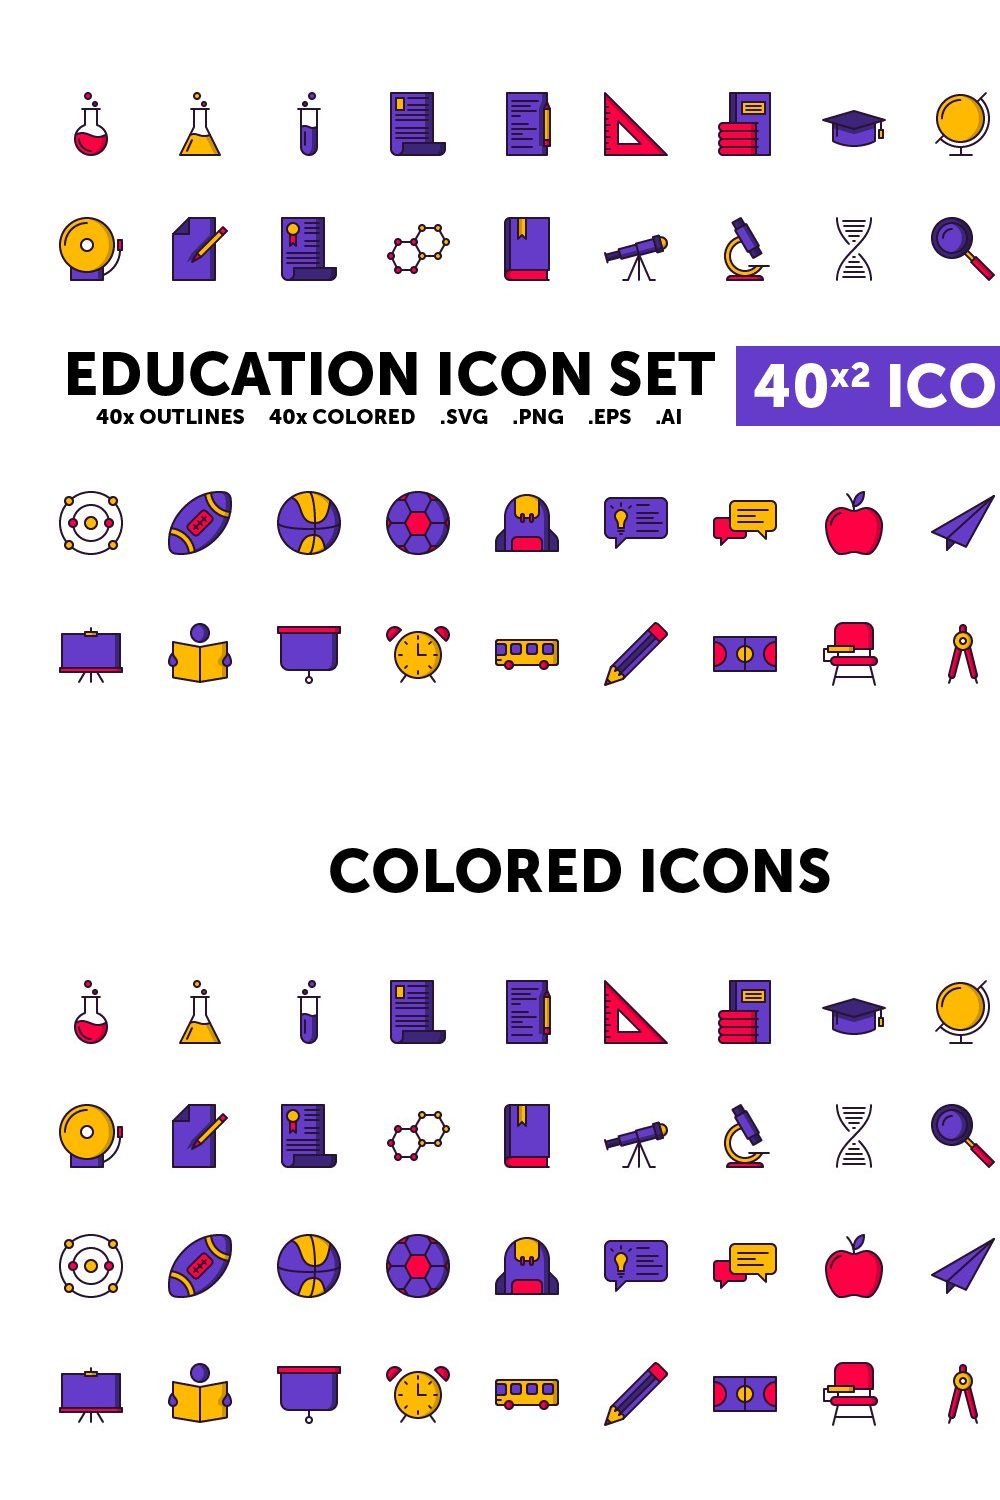 Education Icon Set - 40(x2) Icons pinterest preview image.